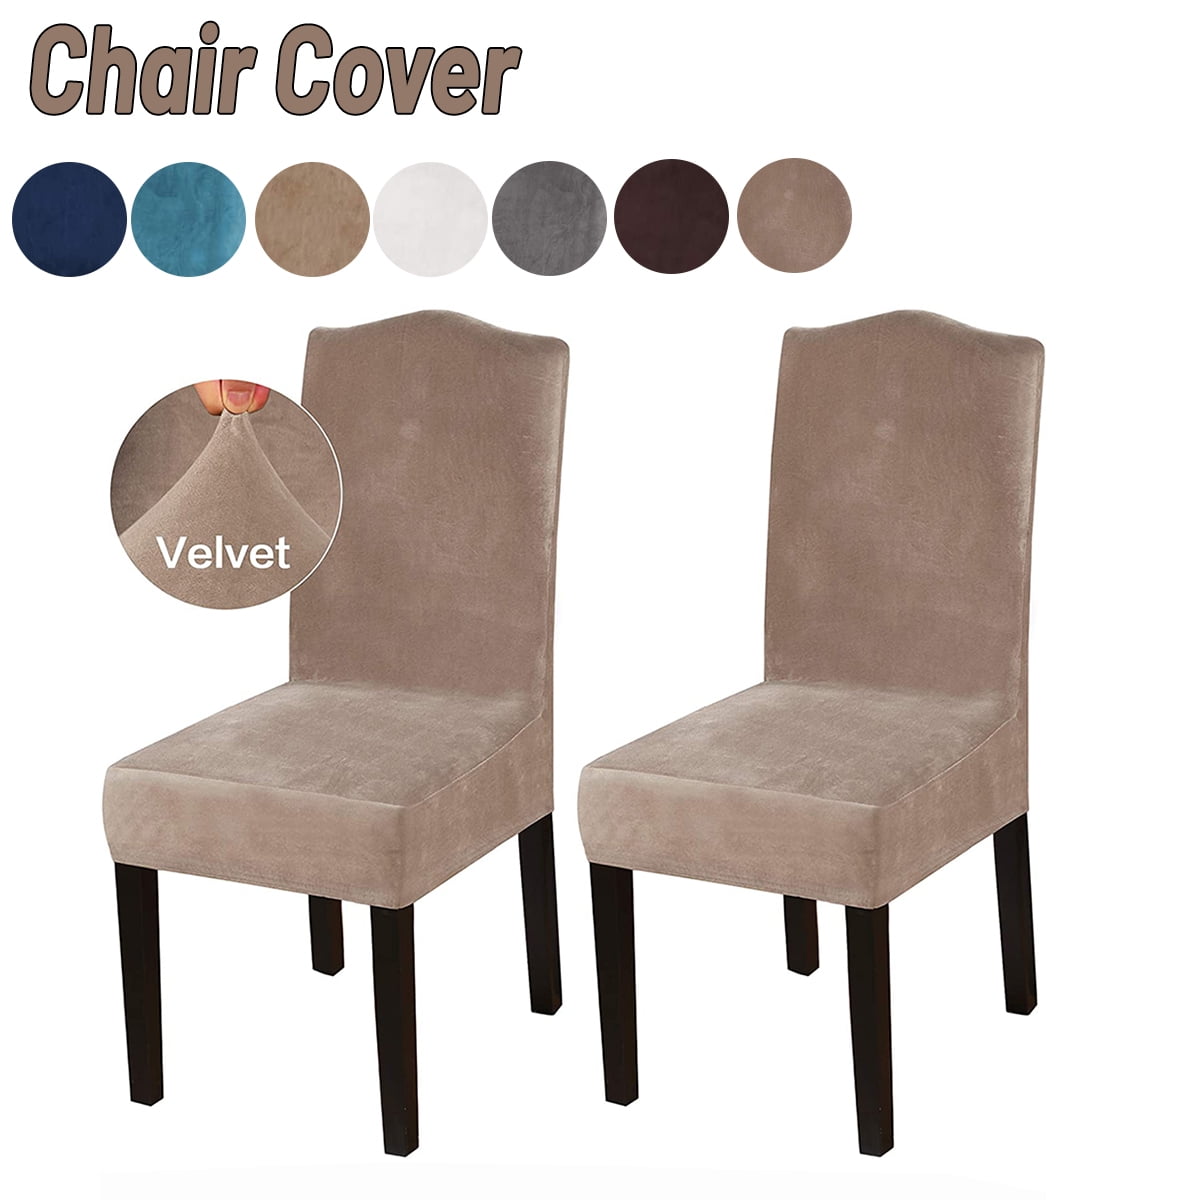 Details about   Stretch Round Dining Chair Covers Bar Stool Seat Slipcovers Home Decor 1/4/8Pcs 